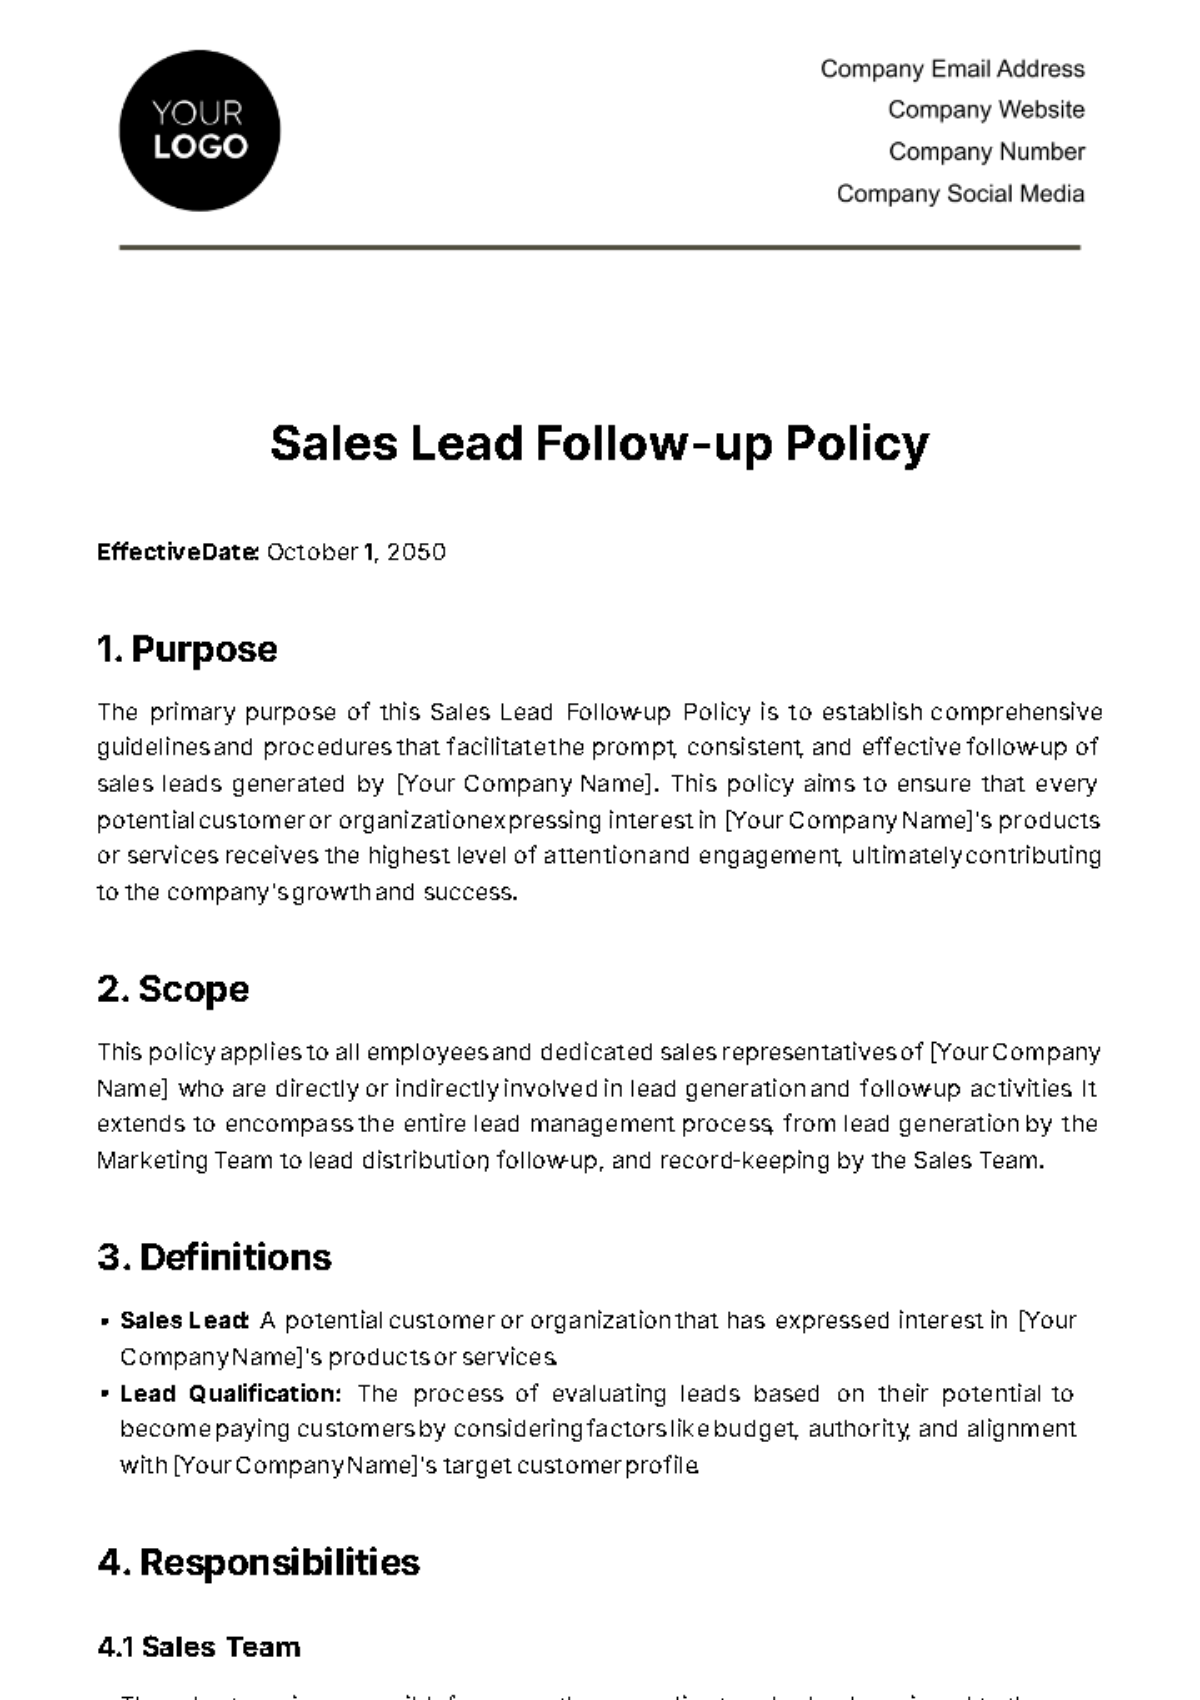 Sales Lead Follow-up Policy Template